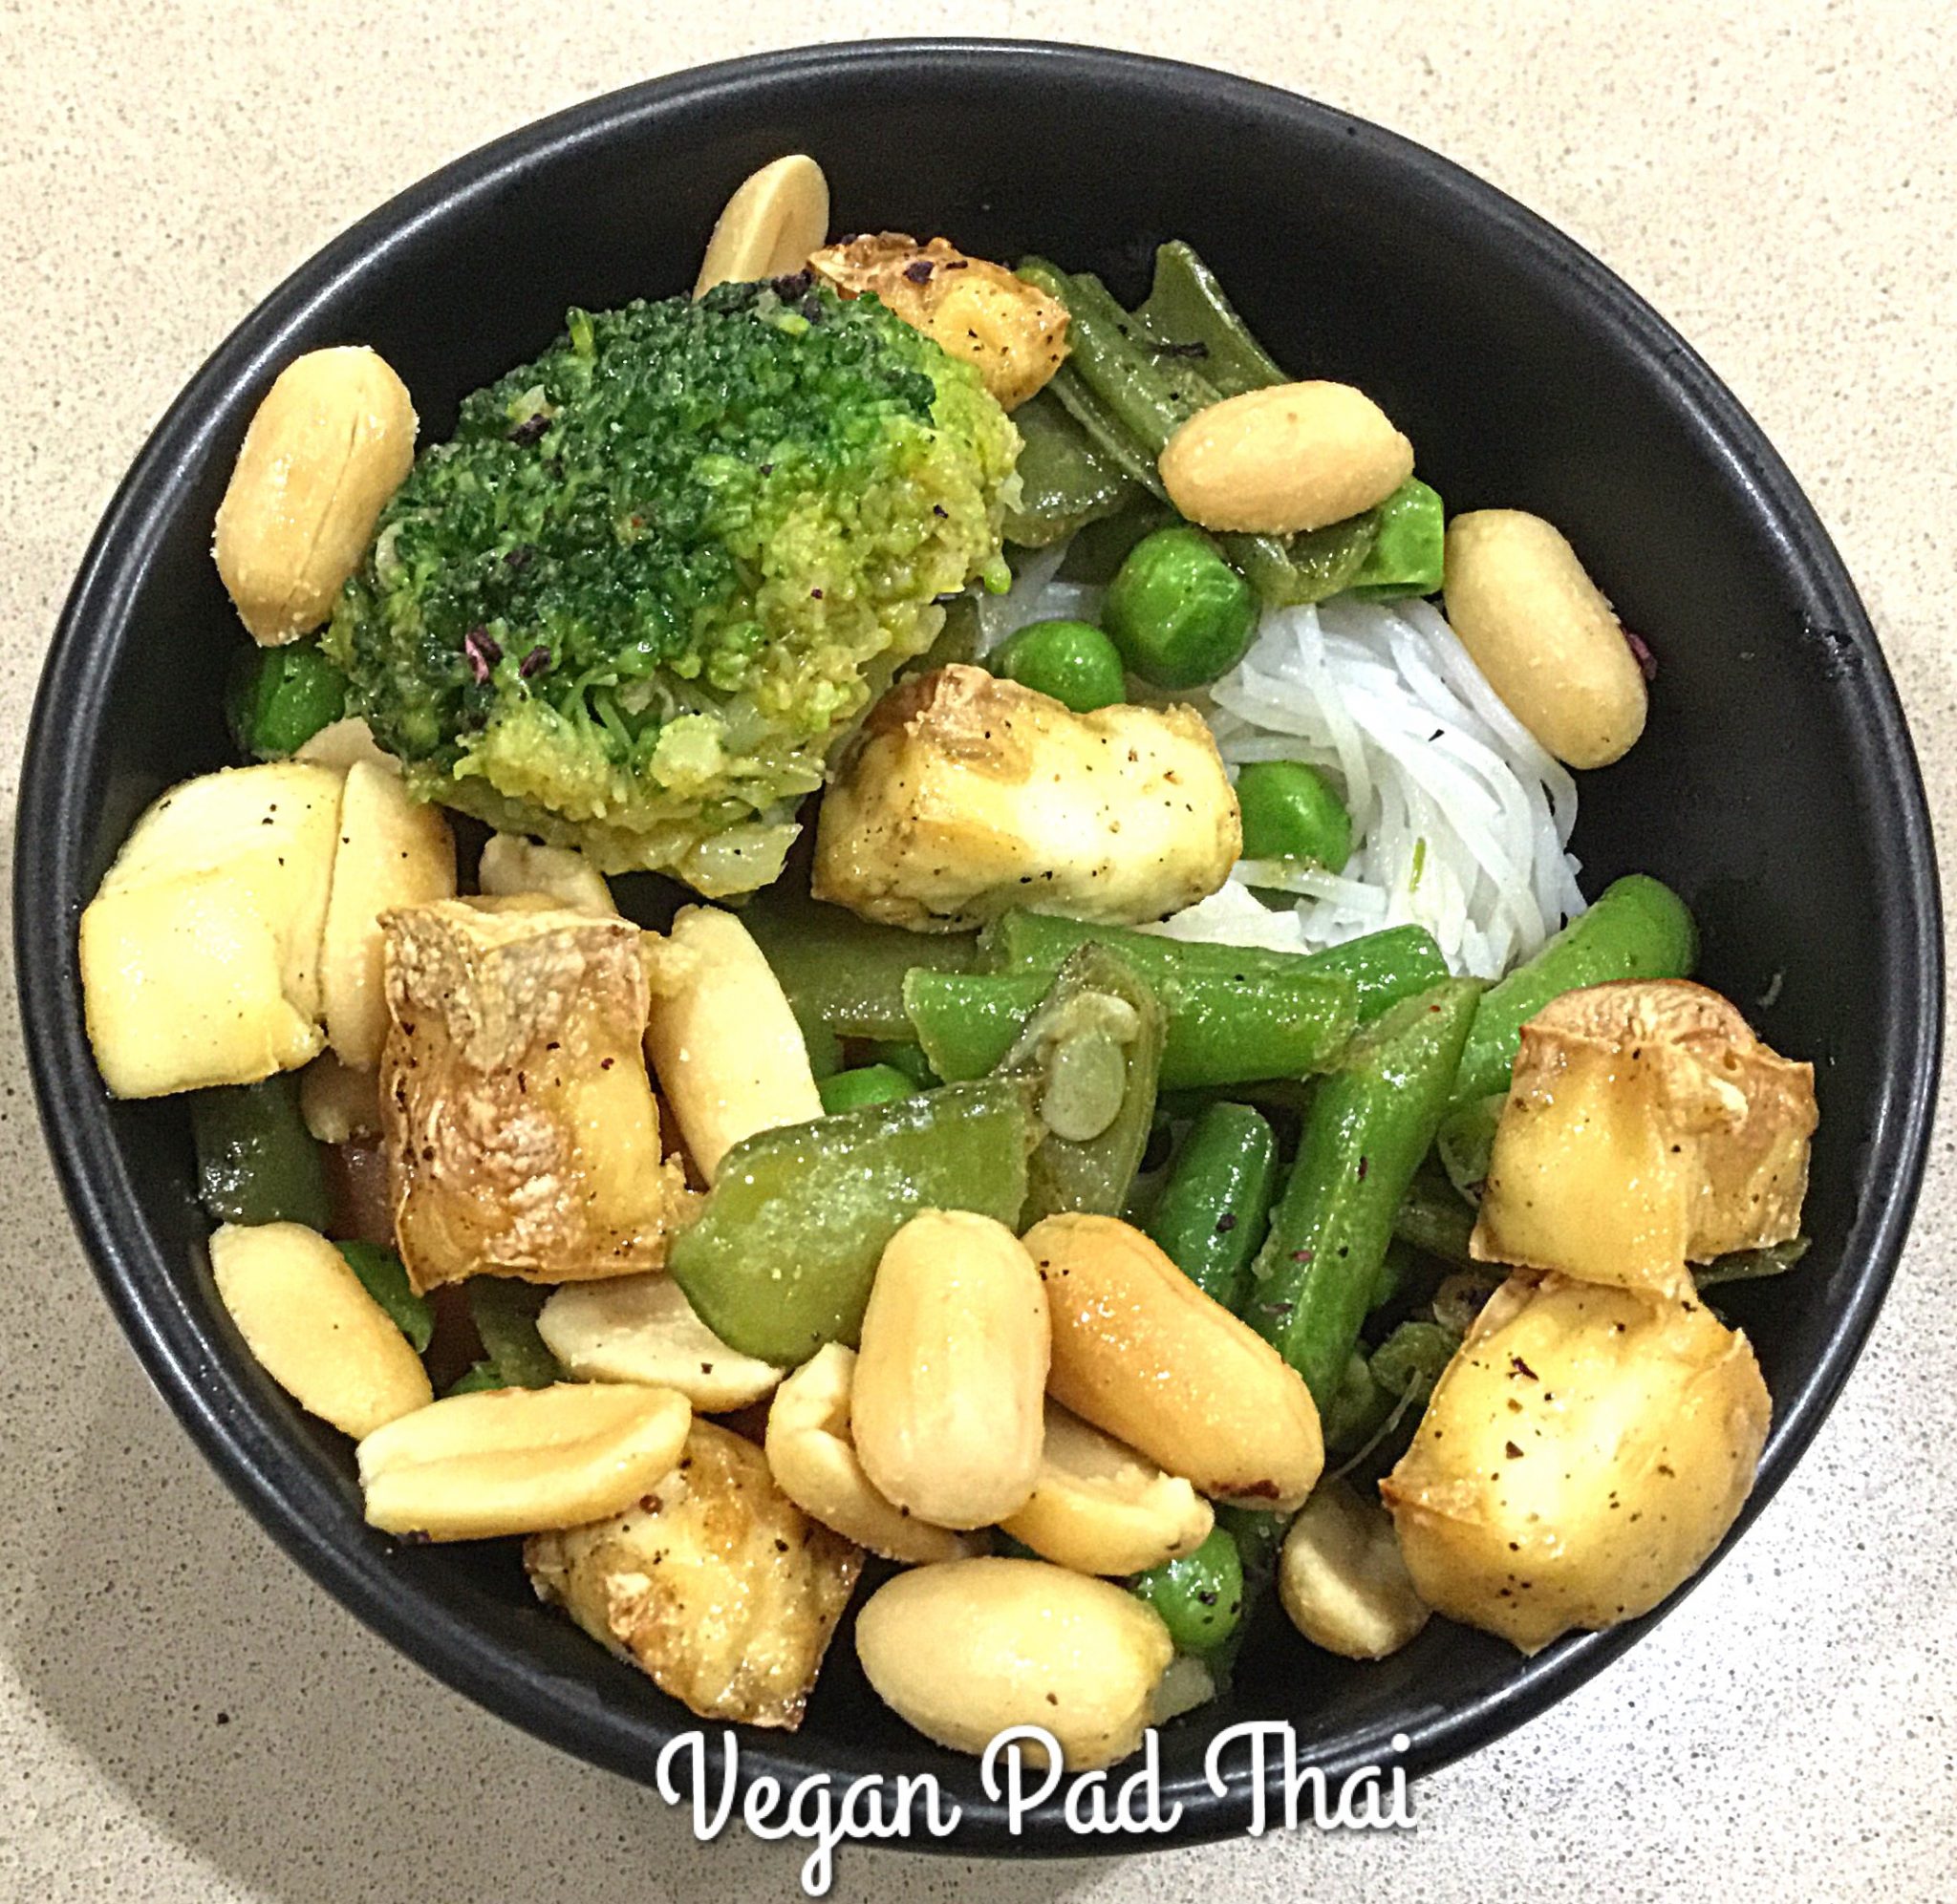 Vegan Mixed Vegetables in Coconut Sauce A.K.A. Avial (Gluten Free)